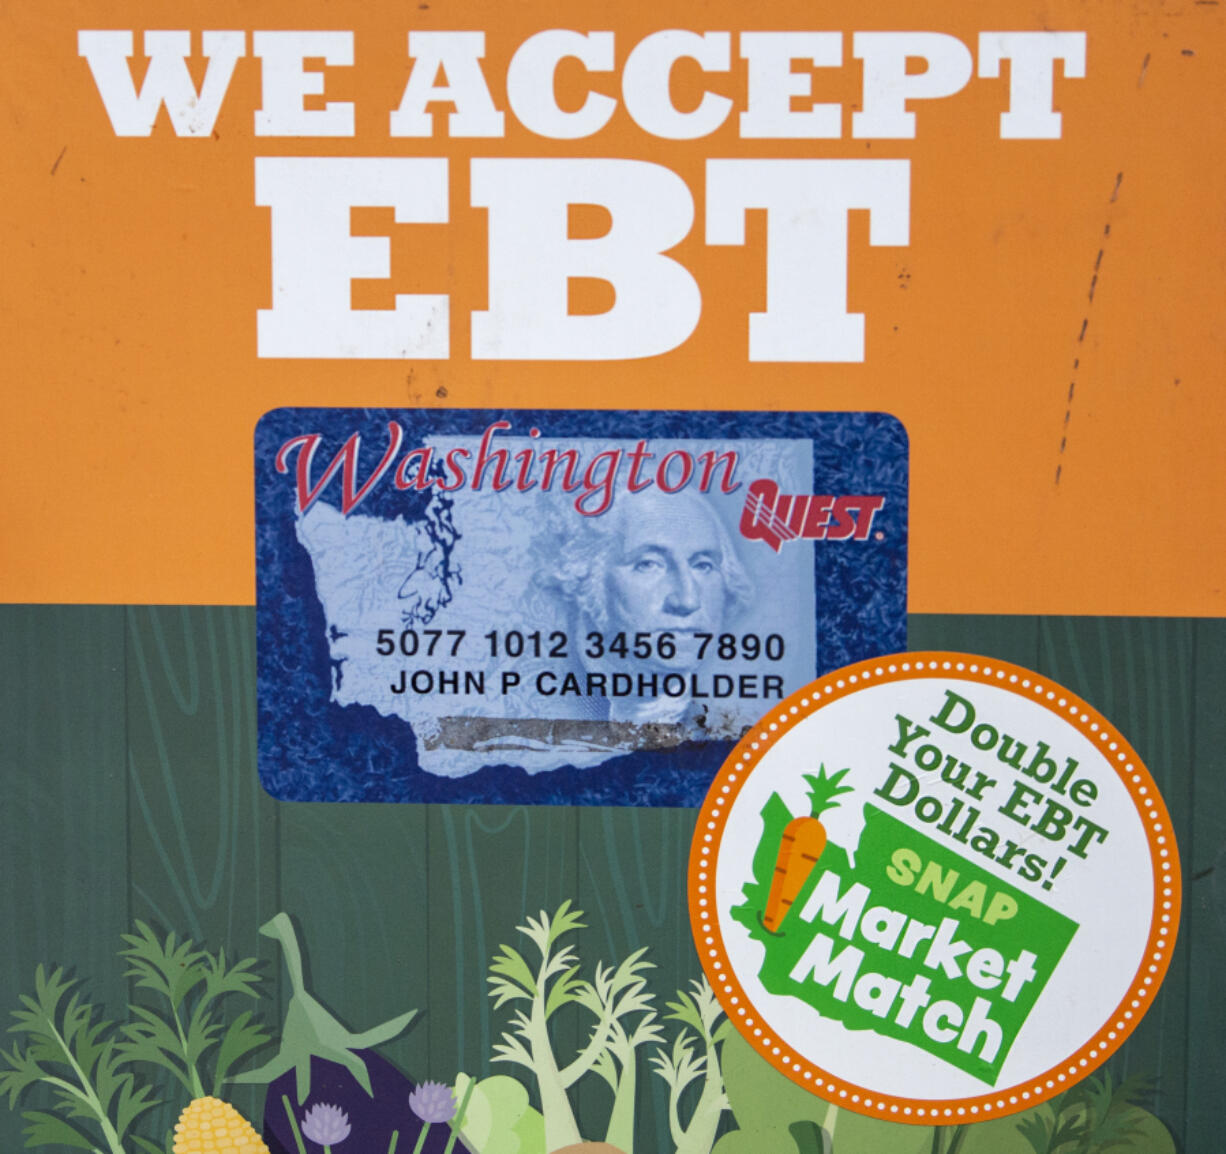 A sandwich board outside the information booth at the Vancouver Farmers Market in 2020 highlights the benefits for EBT card users and members of the Supplemental Nutrition Assistance Program. After SNAP benefits received a boost in 2021, SNAP benefit use at the farmers market increased by 450 percent.